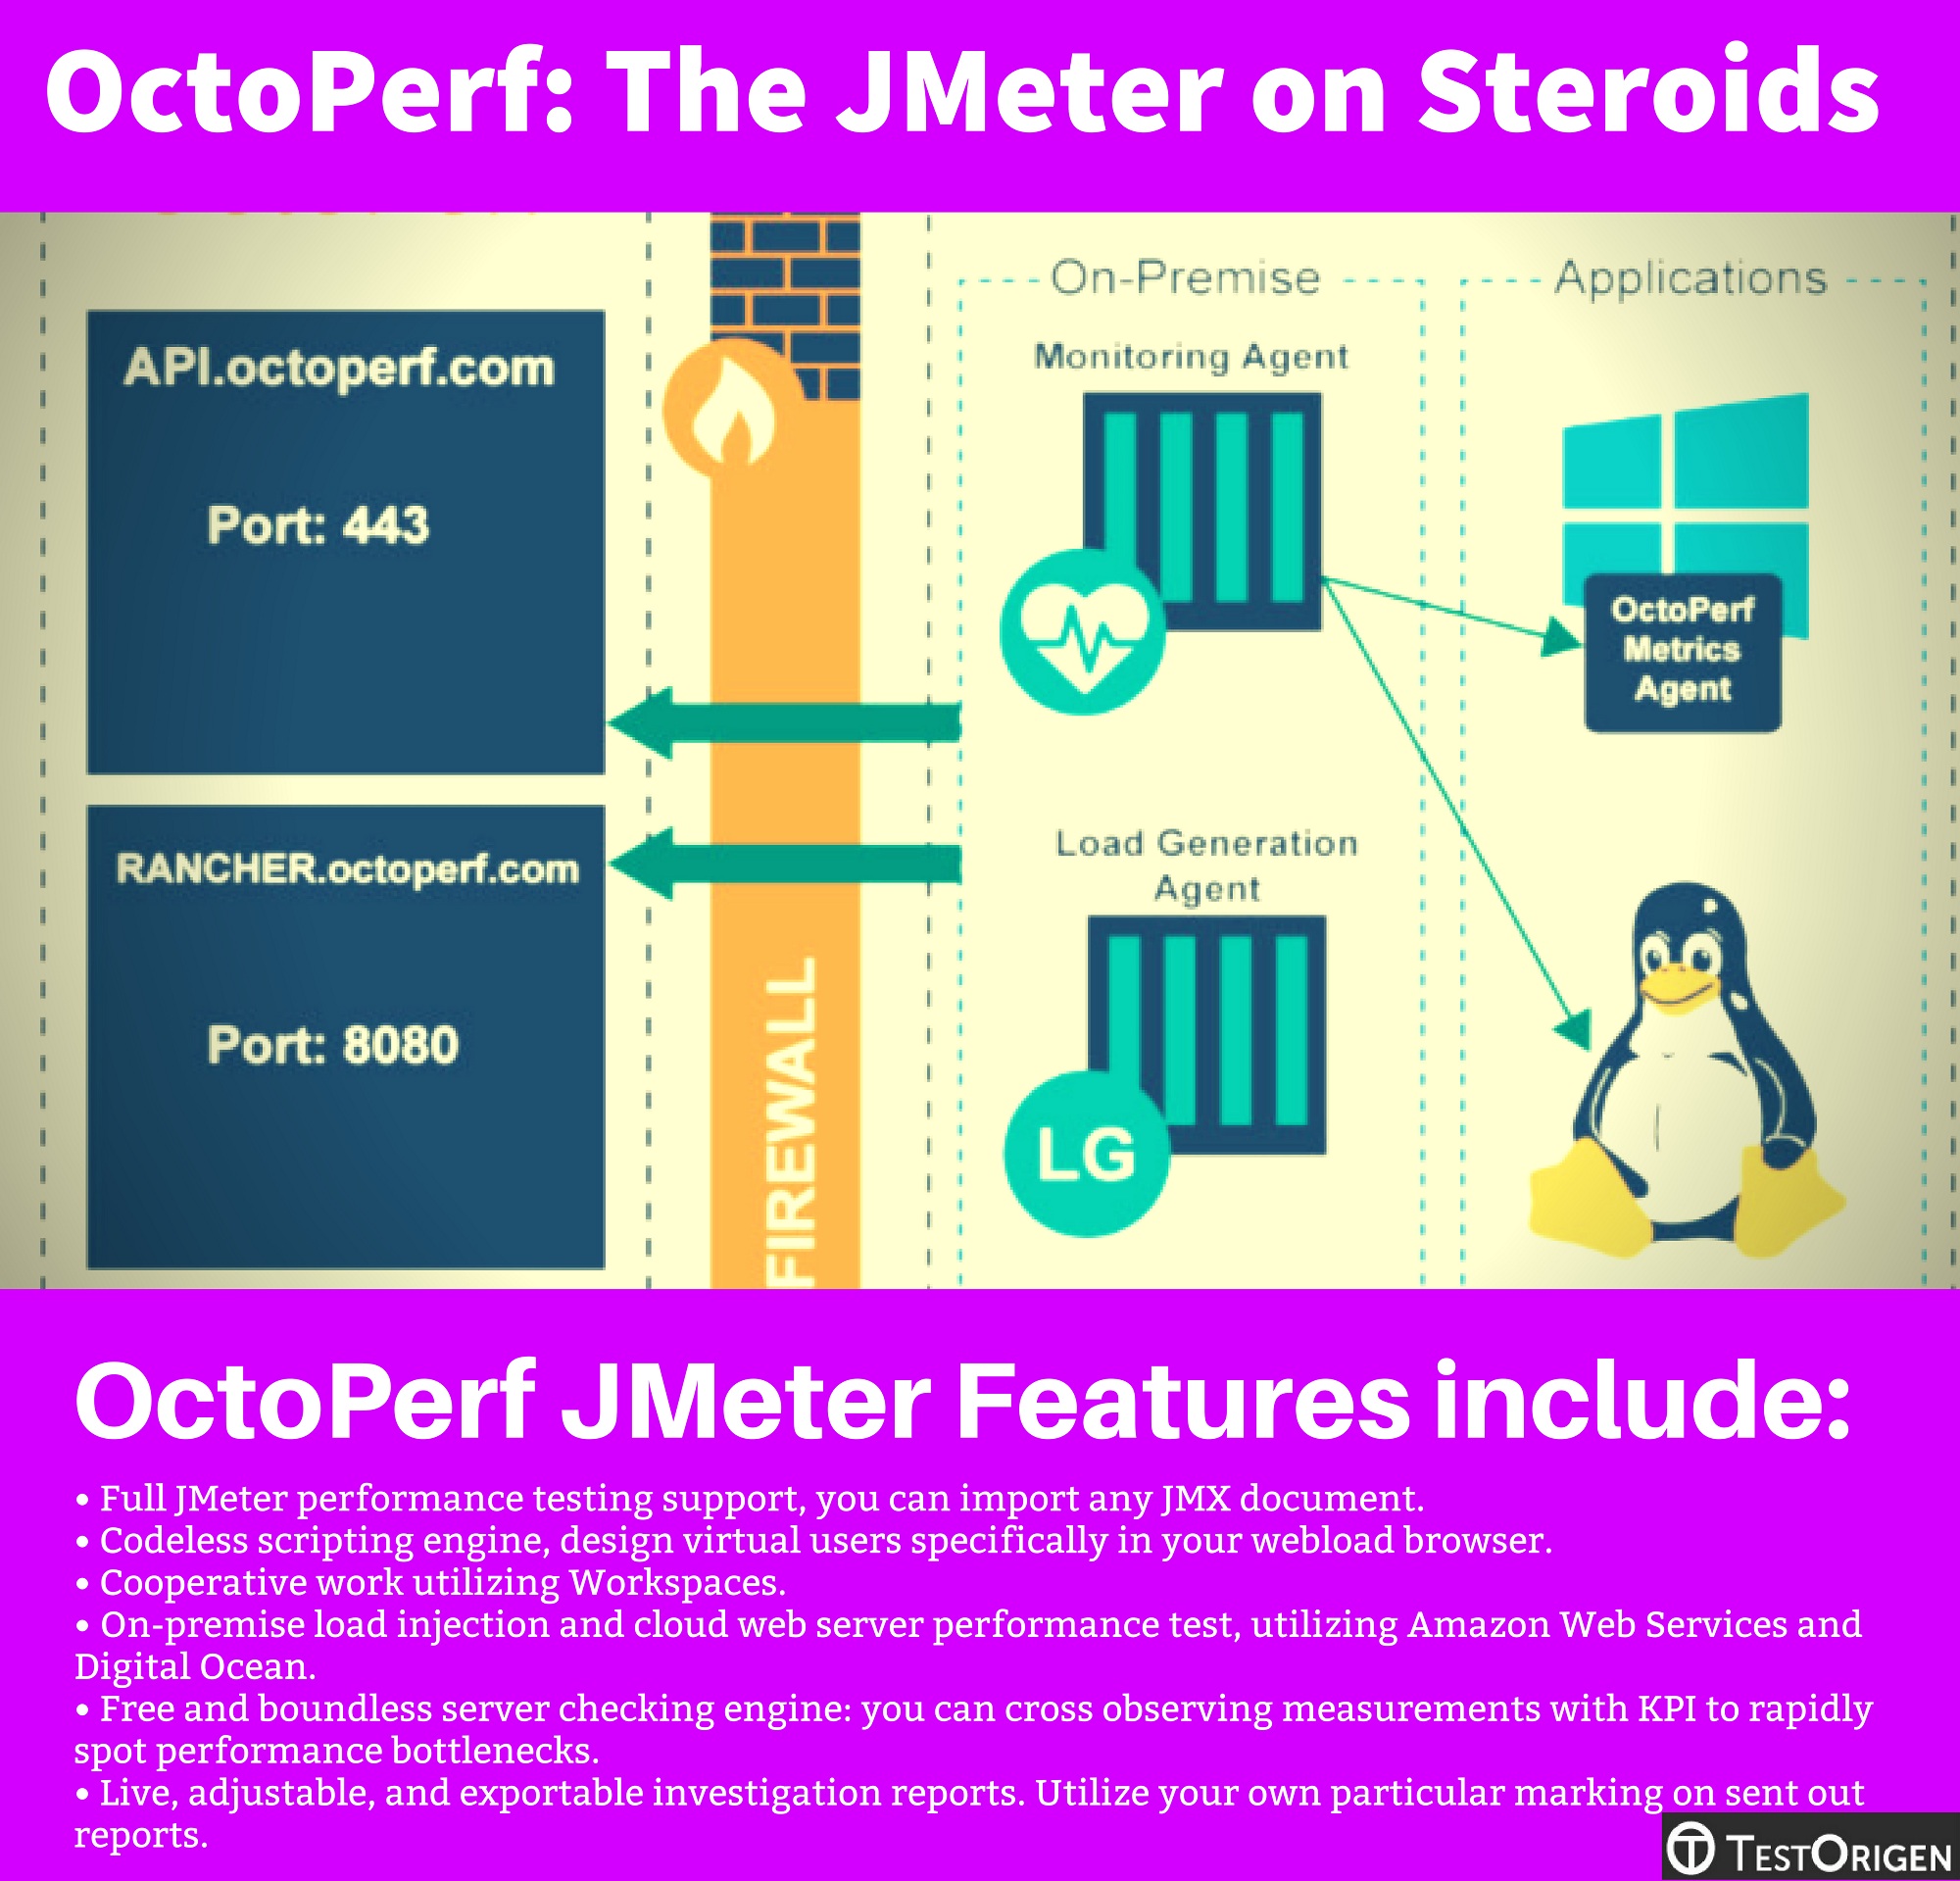 OctoPerf: The JMeter on Steroids